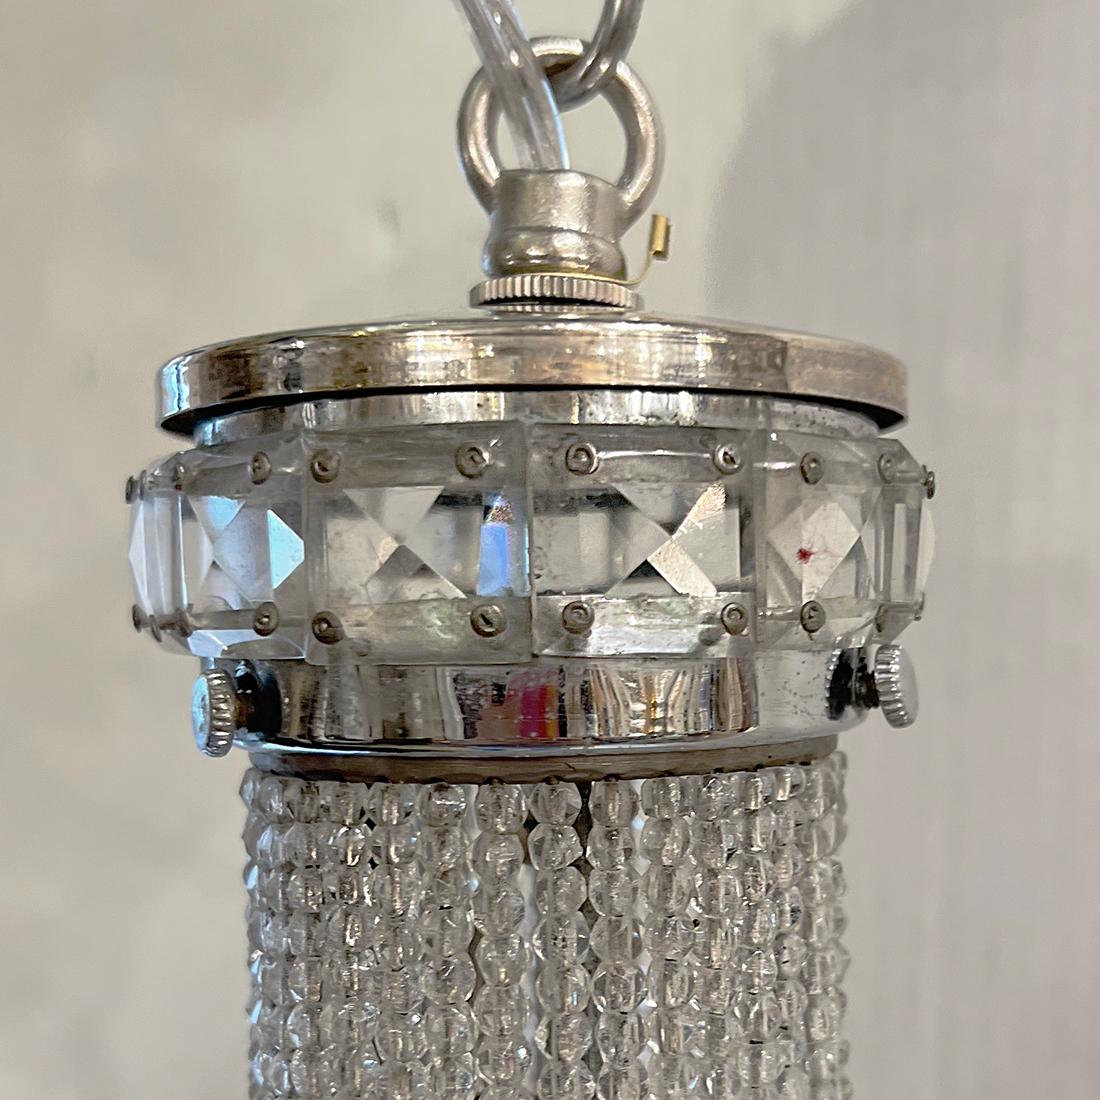 A circa 1920's French beaded crystals lantern with 2 interior lights.

Measurements:
Present Drop: 20.5